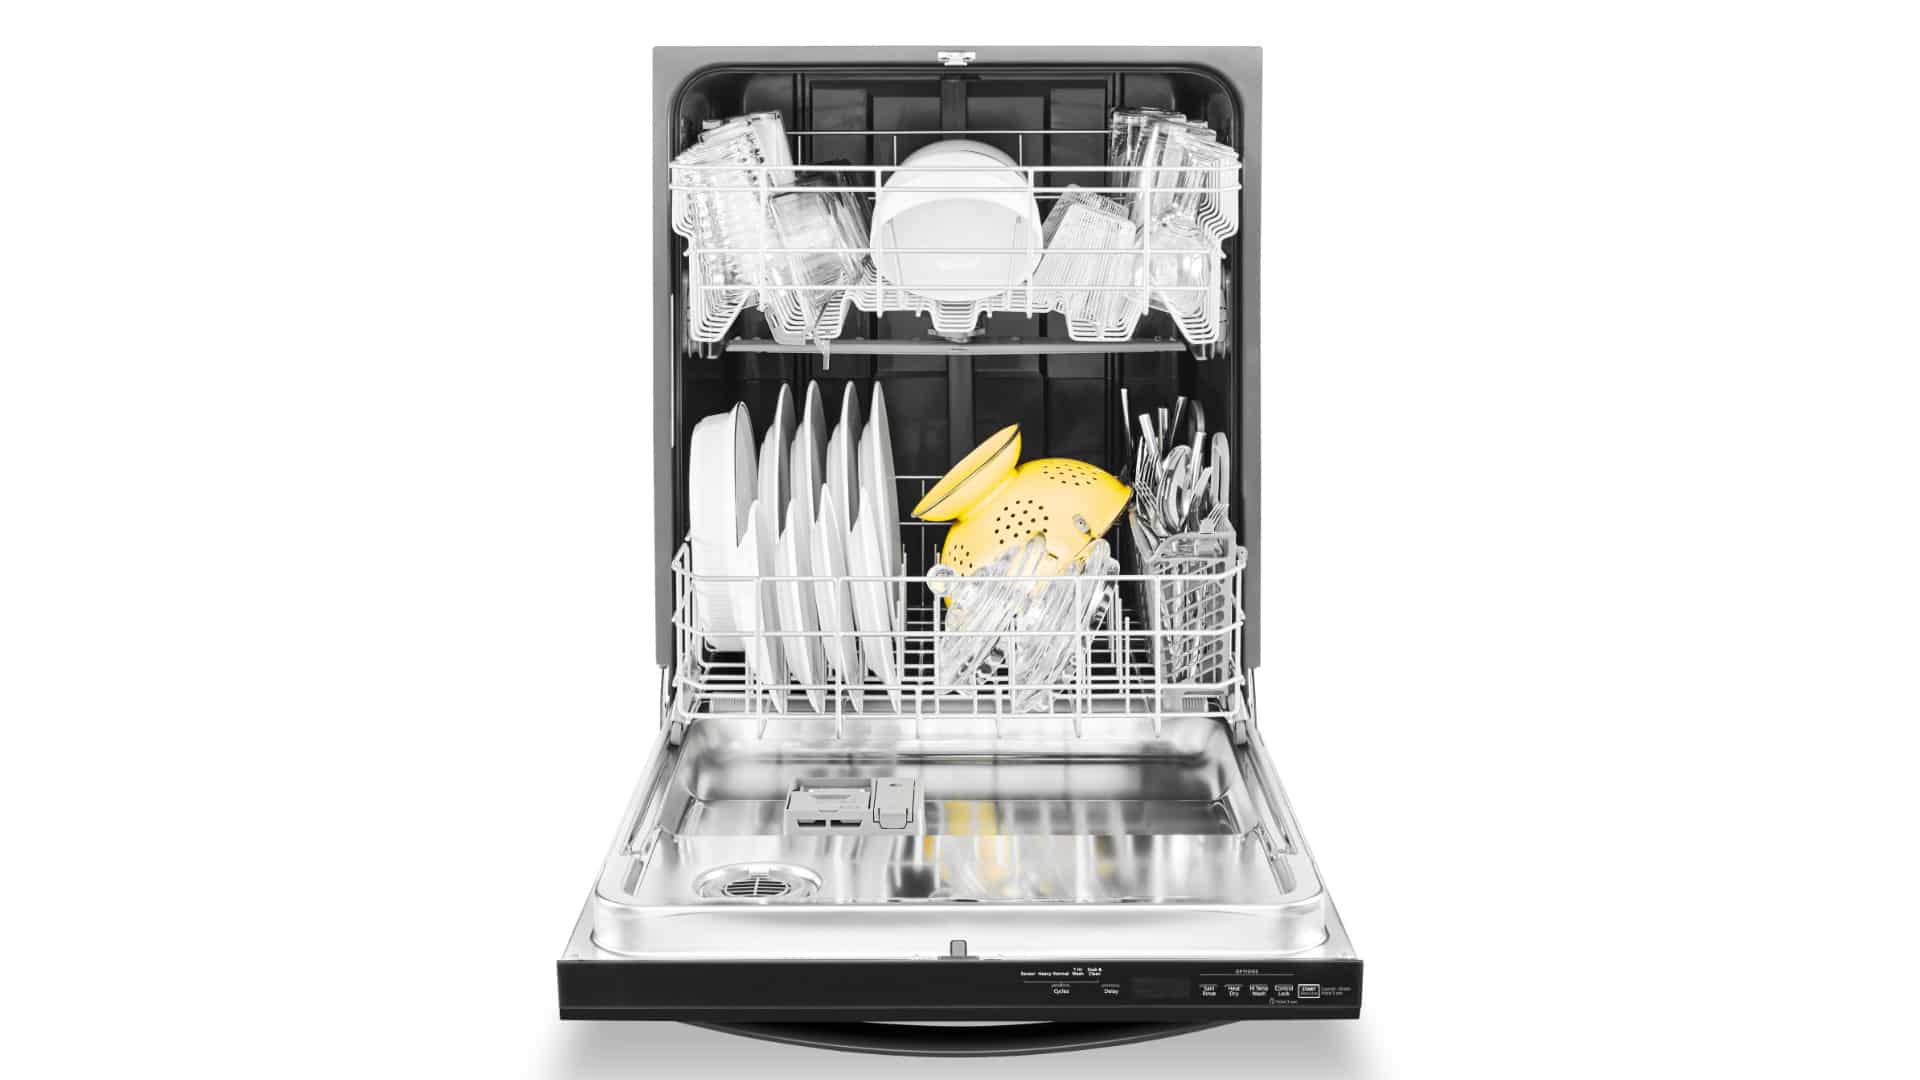 Featured image for “Samsung Dishwasher Not Draining? Here’s What to Do”